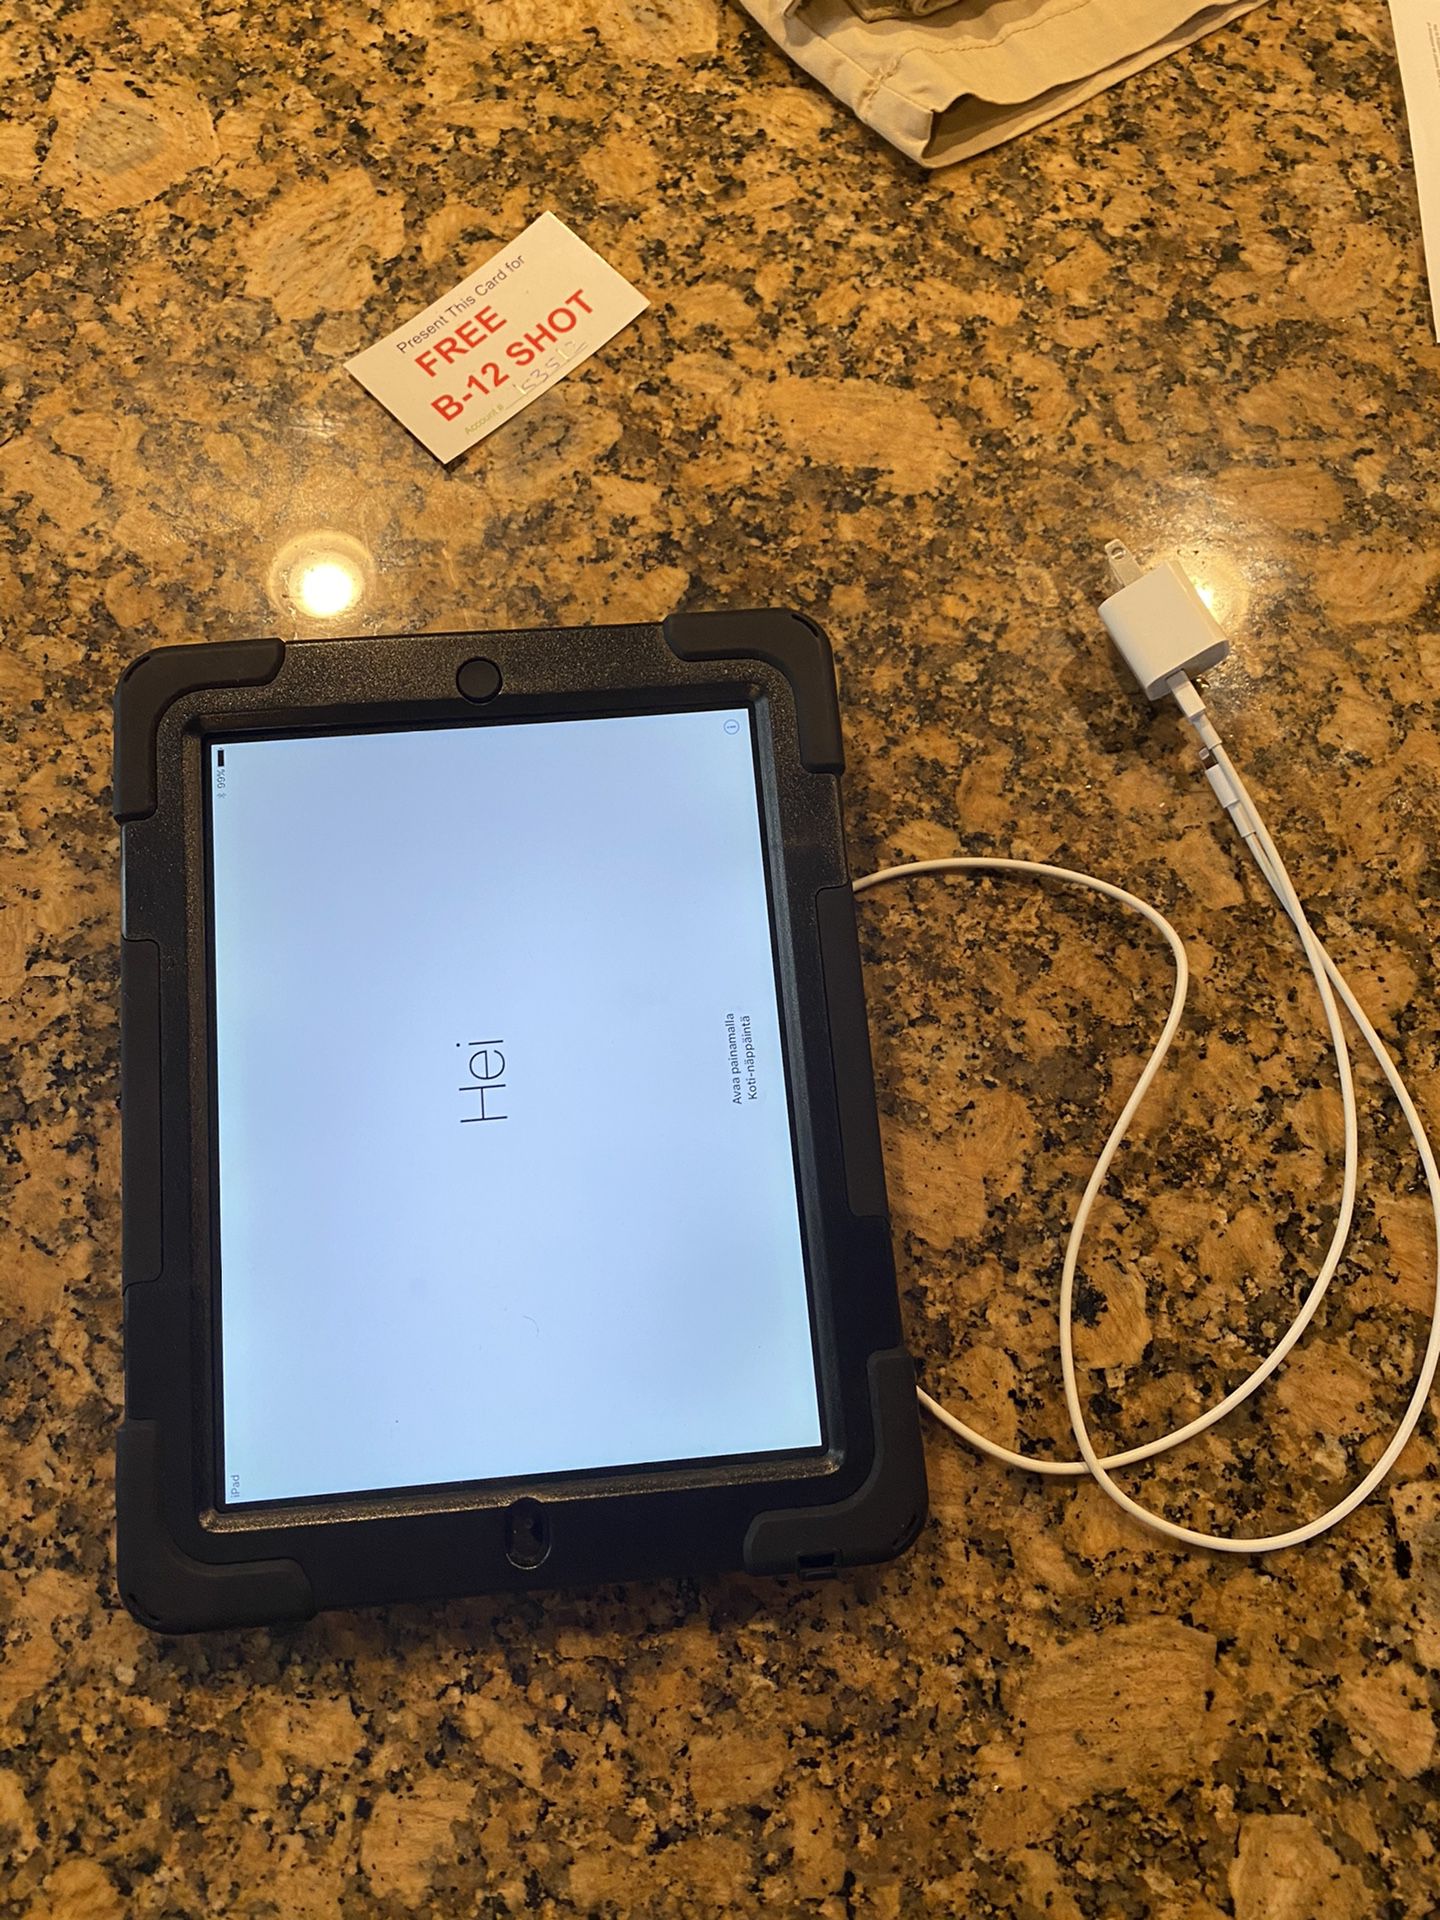 Used iPad 4 with protective case and charger